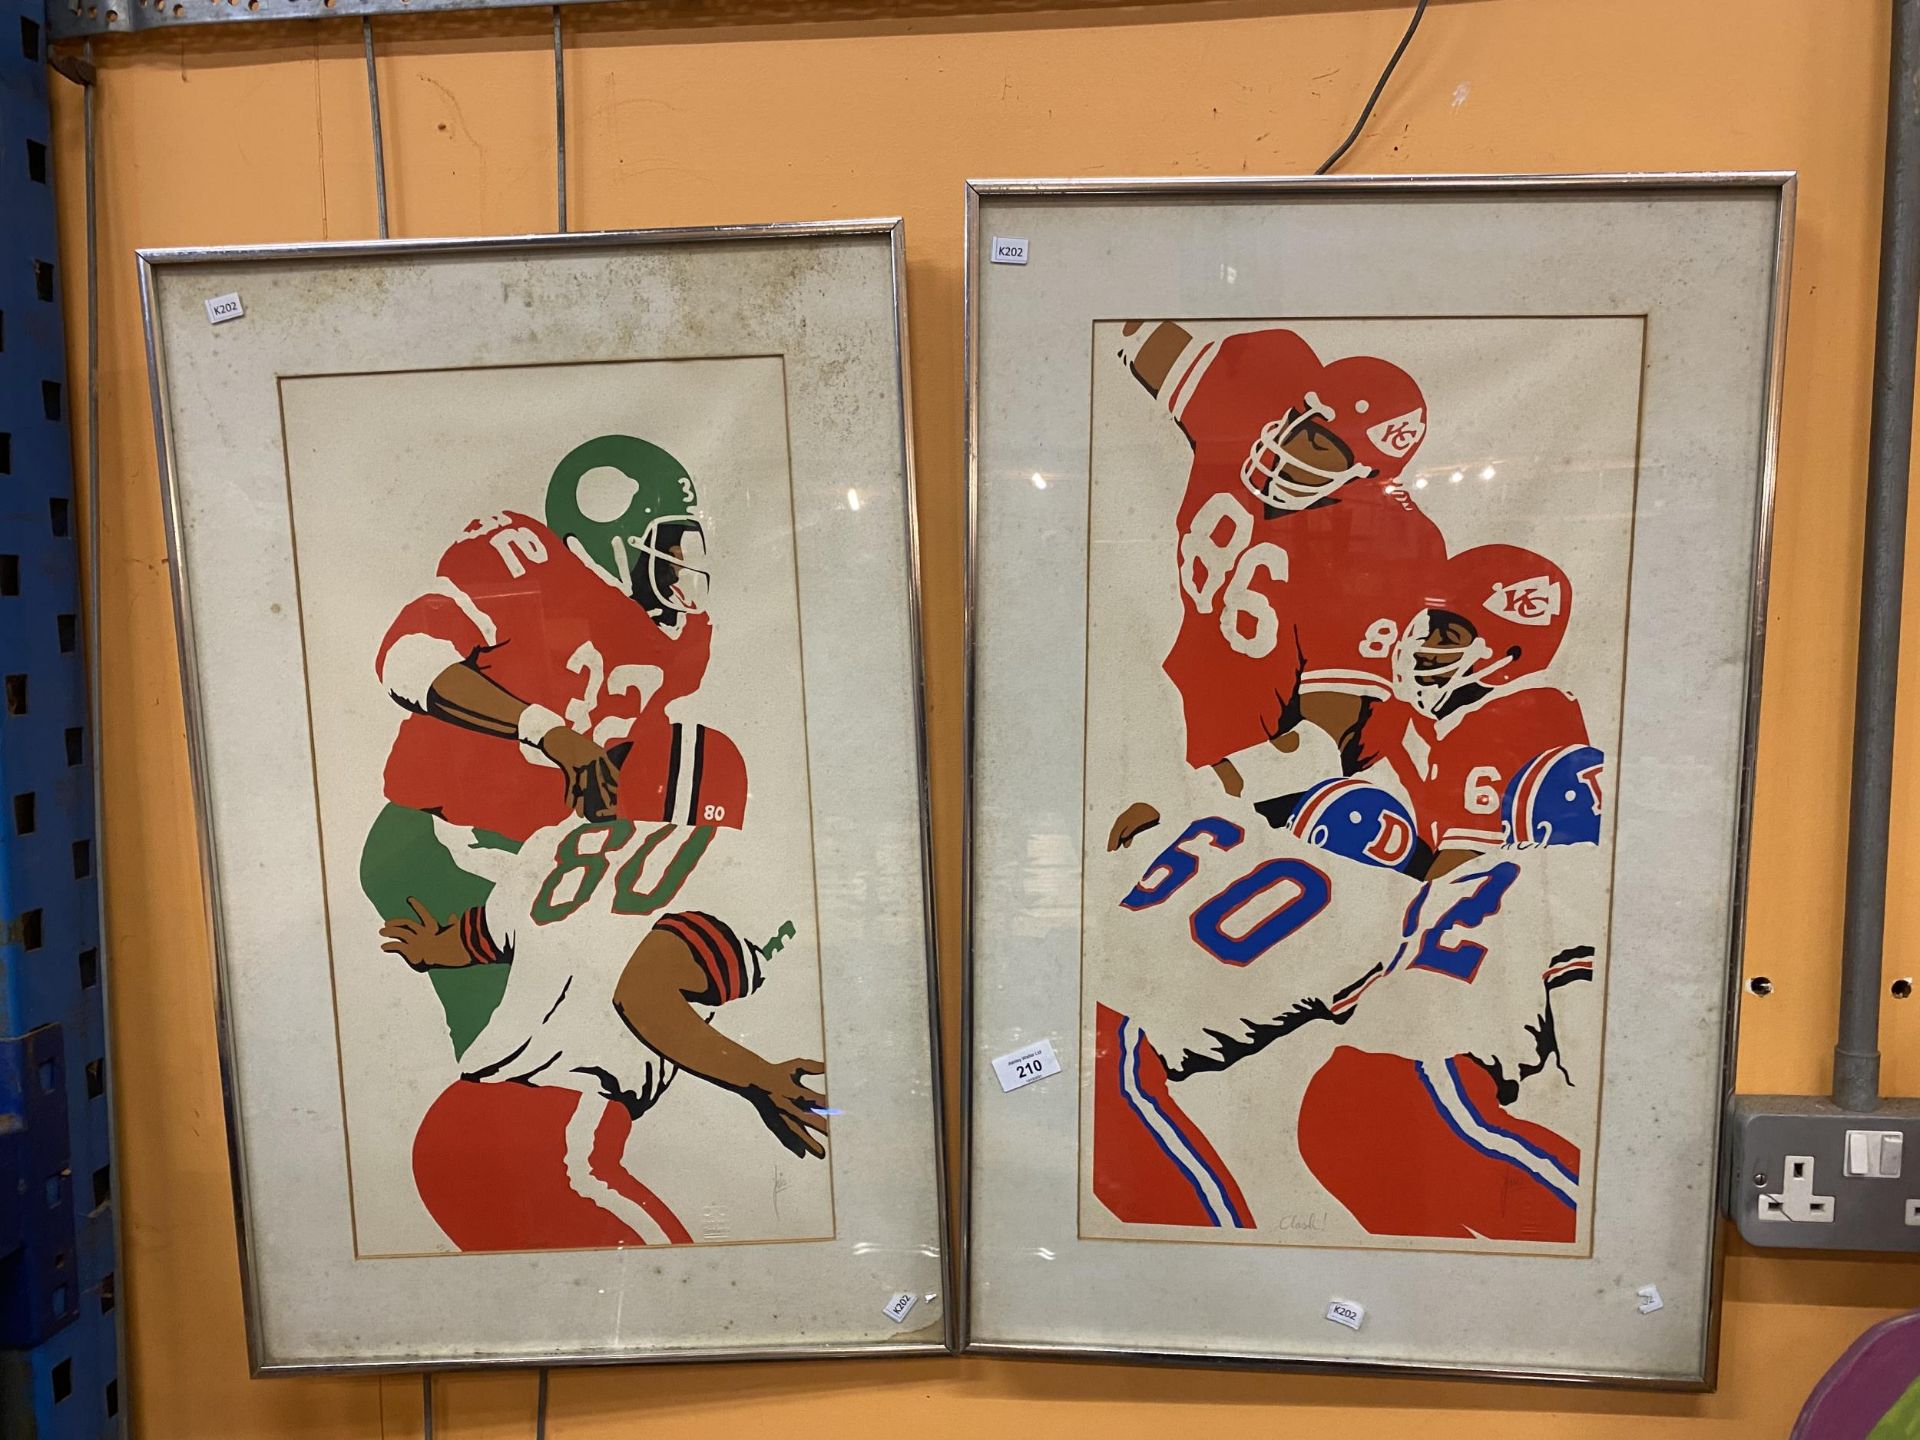 TWO FRAMED SIGNED PRINTS OF AMERICAN FOOTBALL PLAYERS. FOXING TO BOTH